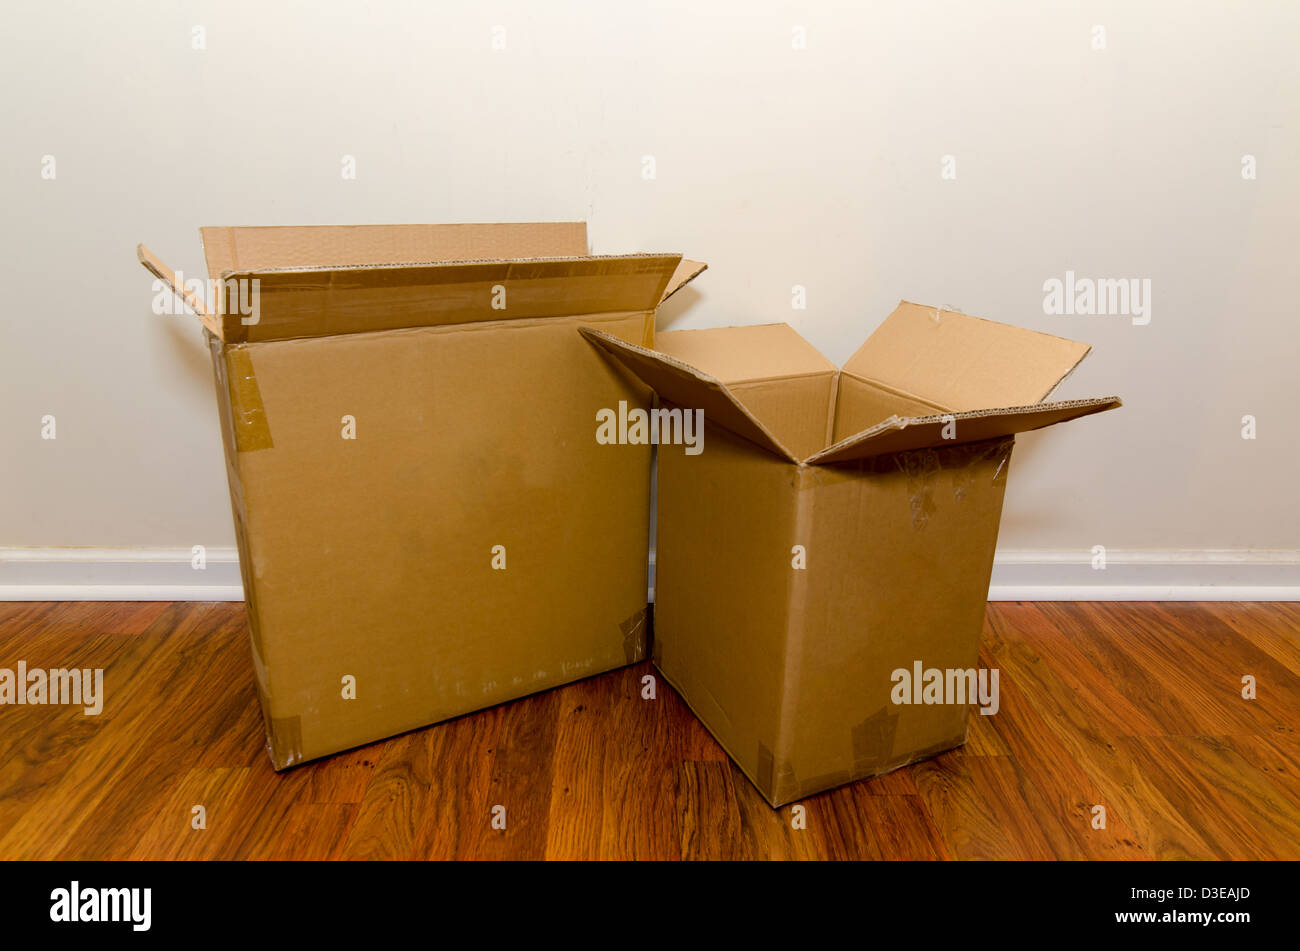 Moving day with empty cardboard boxes on hardwood floor. Stock Photo